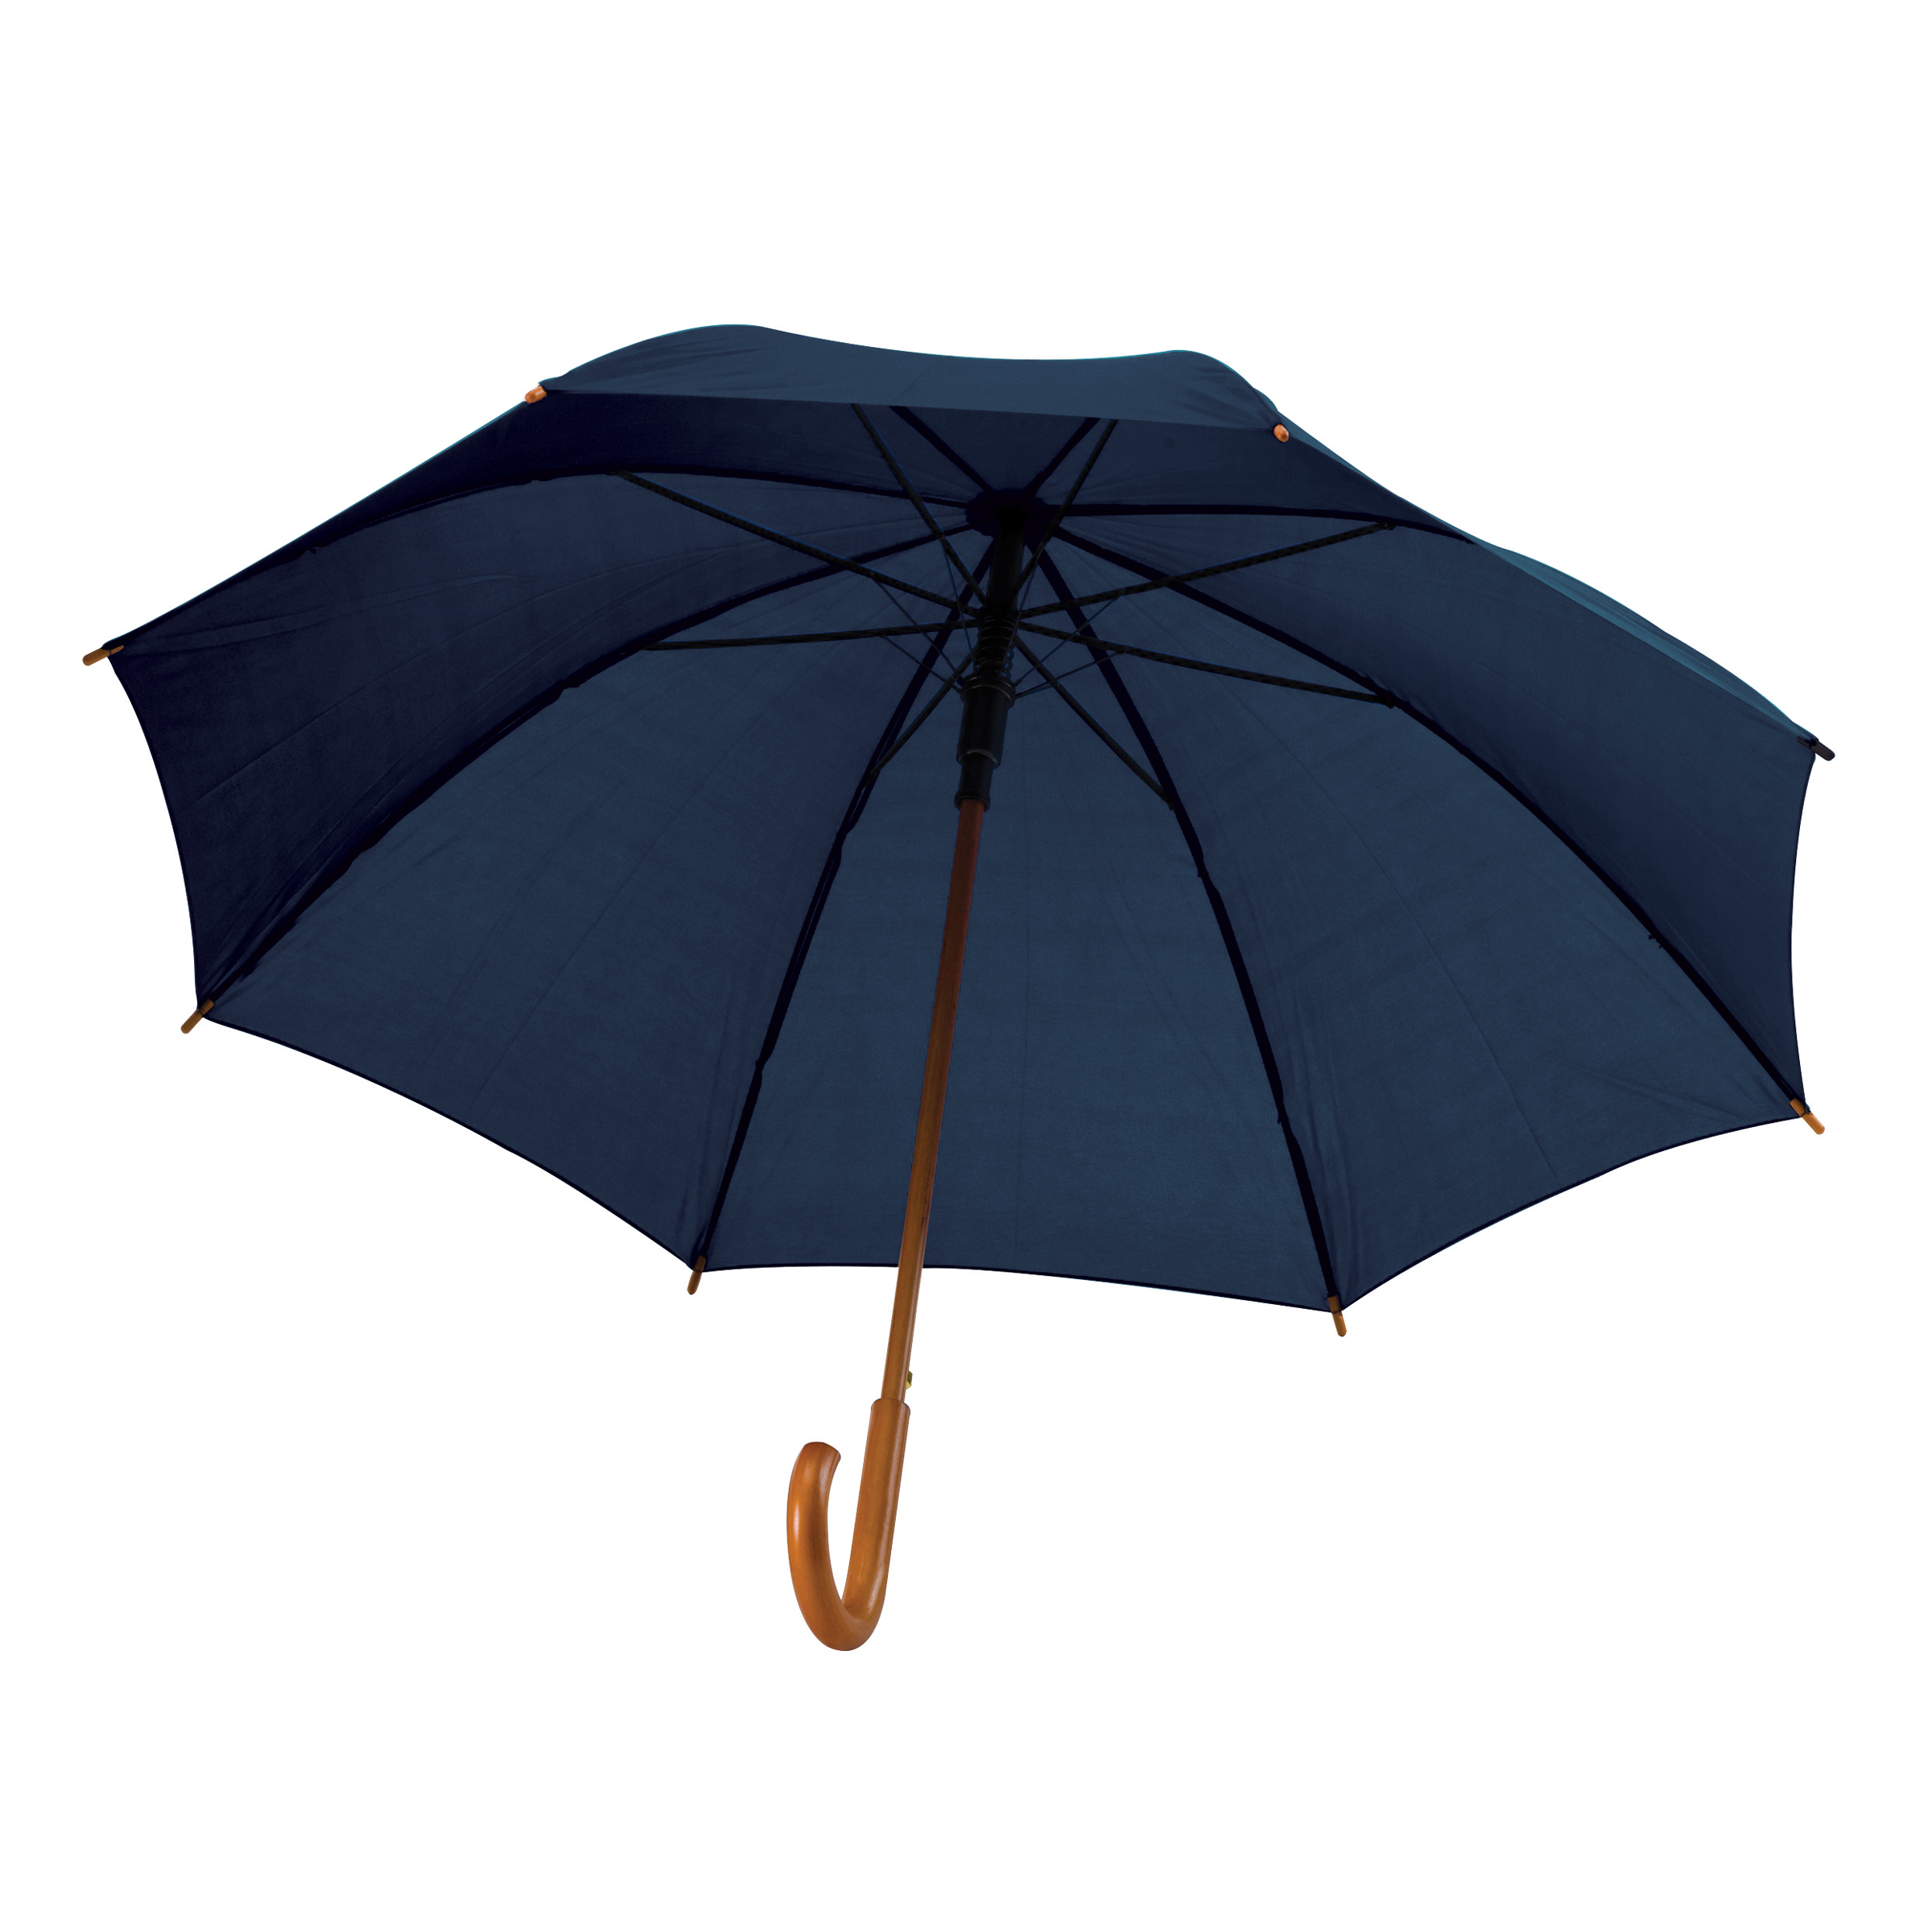 8 Panel Booster Umbrella Product Image